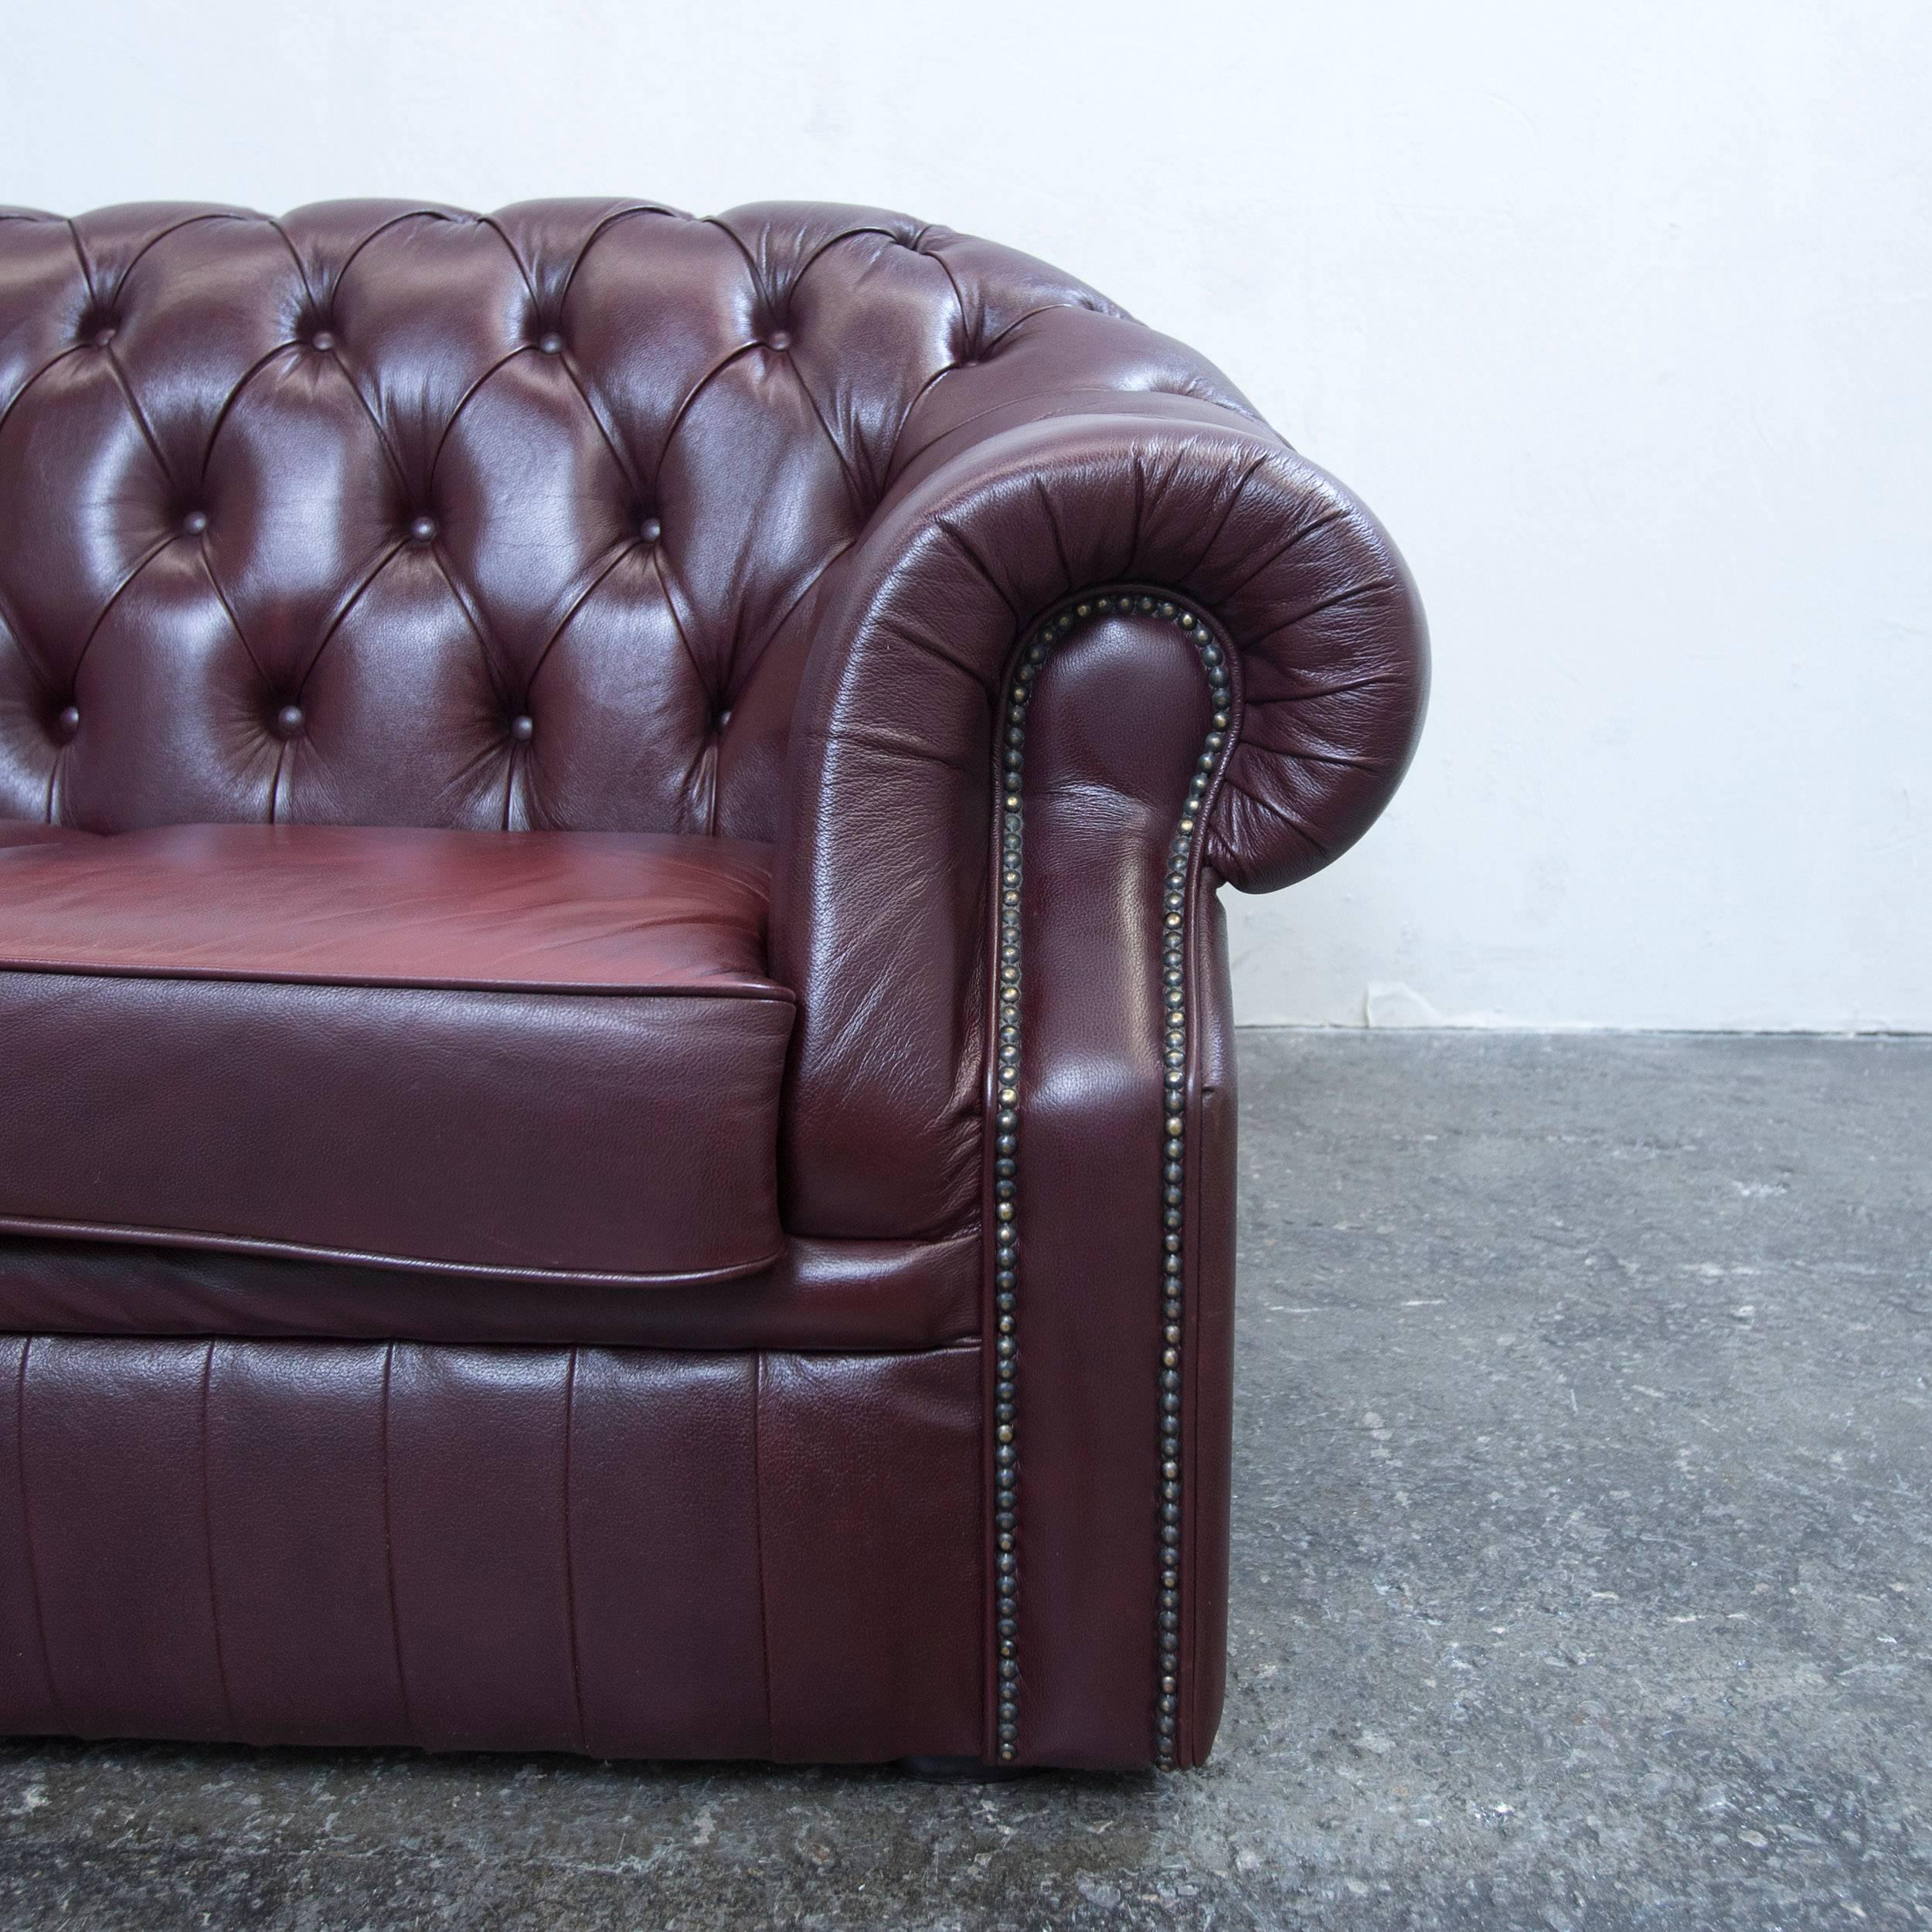 British Chesterfield Sofa Red Brown Leather Three-Seat Couch Retro Vintage